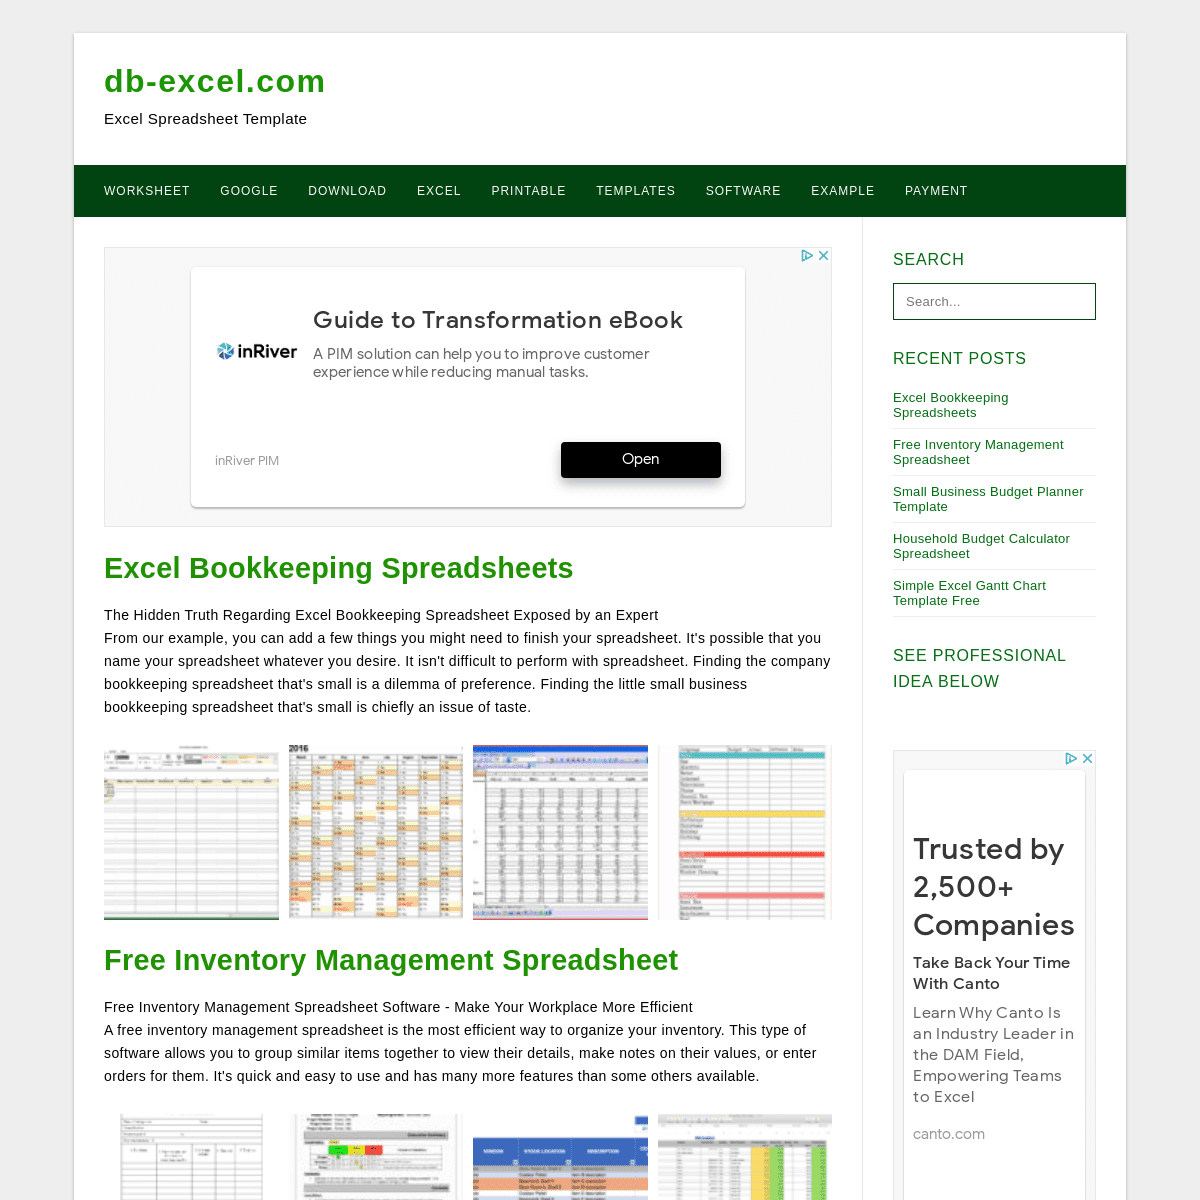 A complete backup of https://db-excel.com